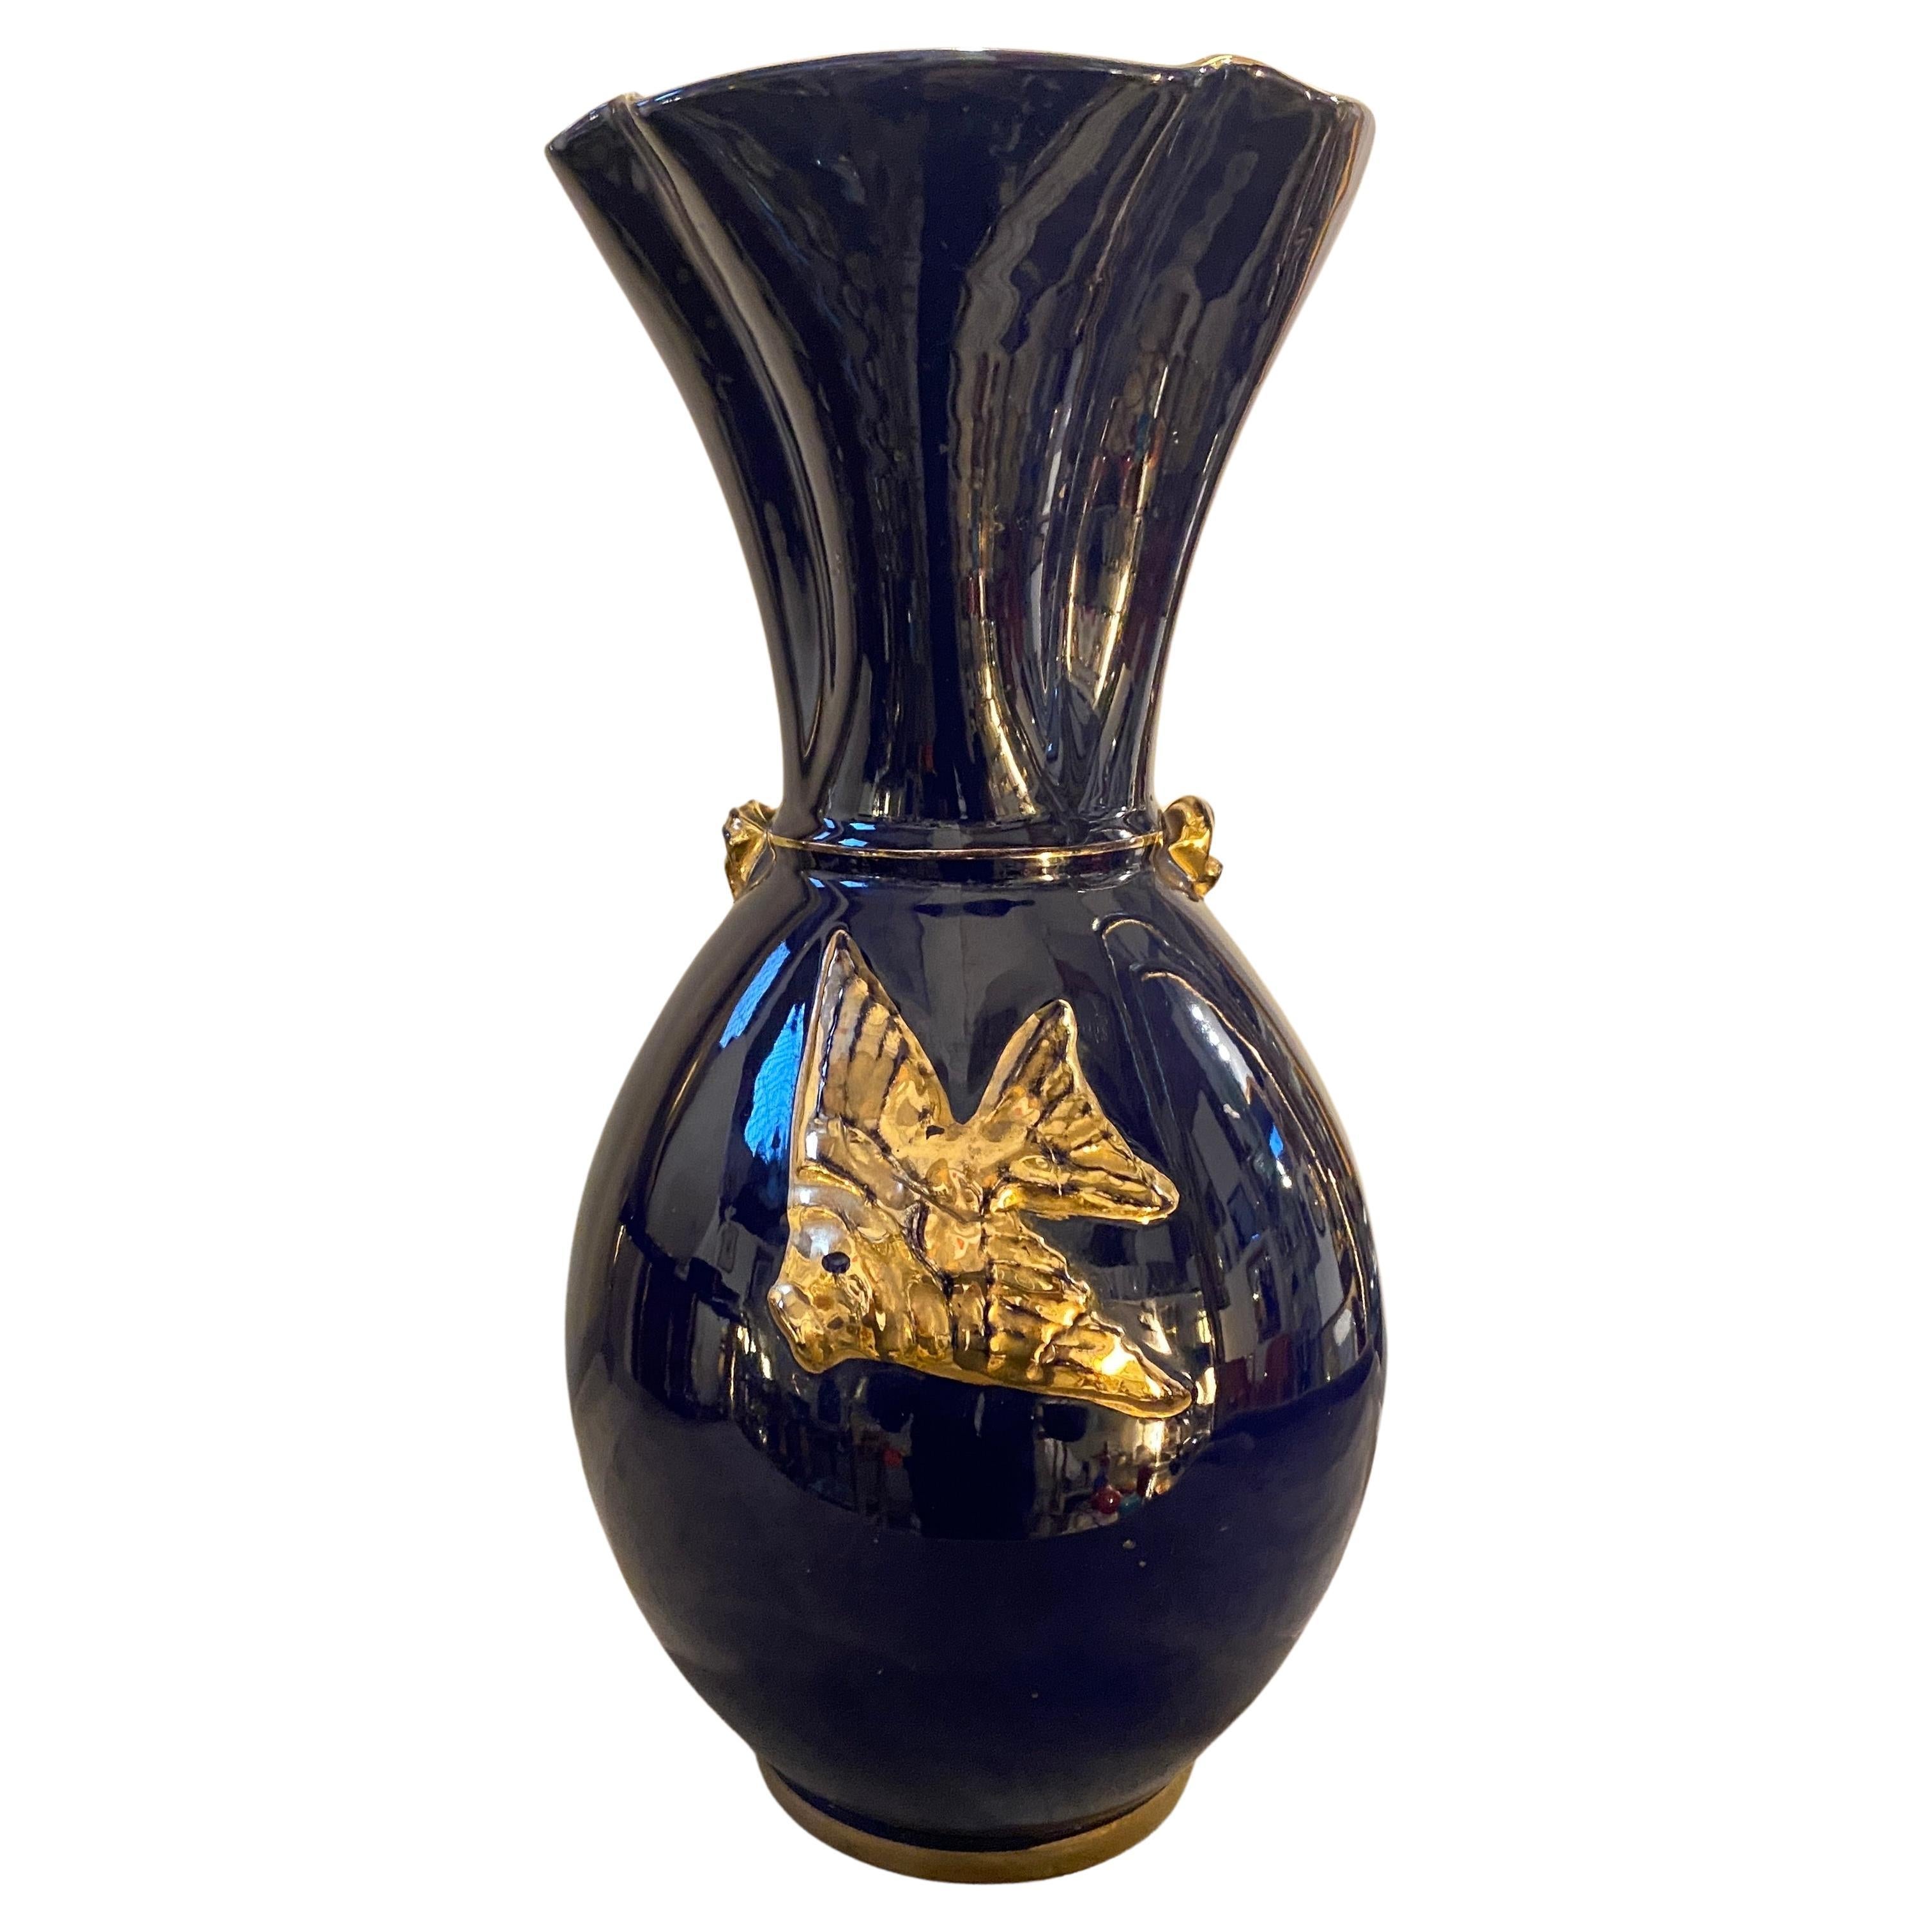 1950s Mid-Century Modern Blue and Gold Ceramic Italian Vase by Icap